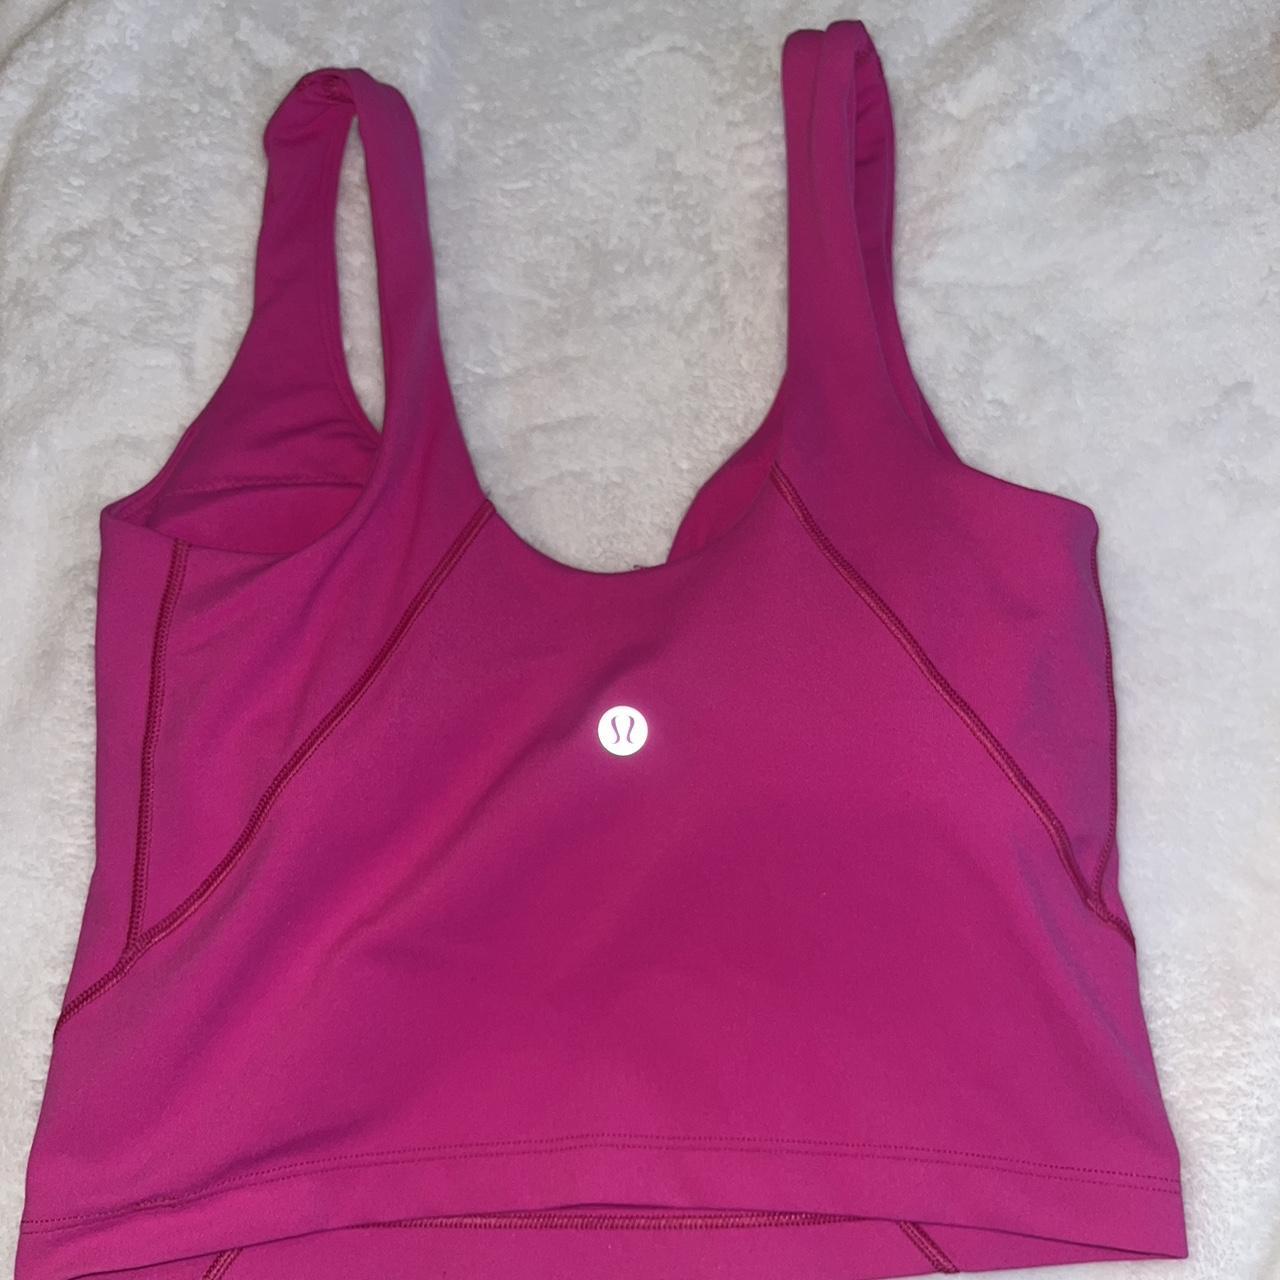 sonic pink align tank size 2. worn a few times and - Depop